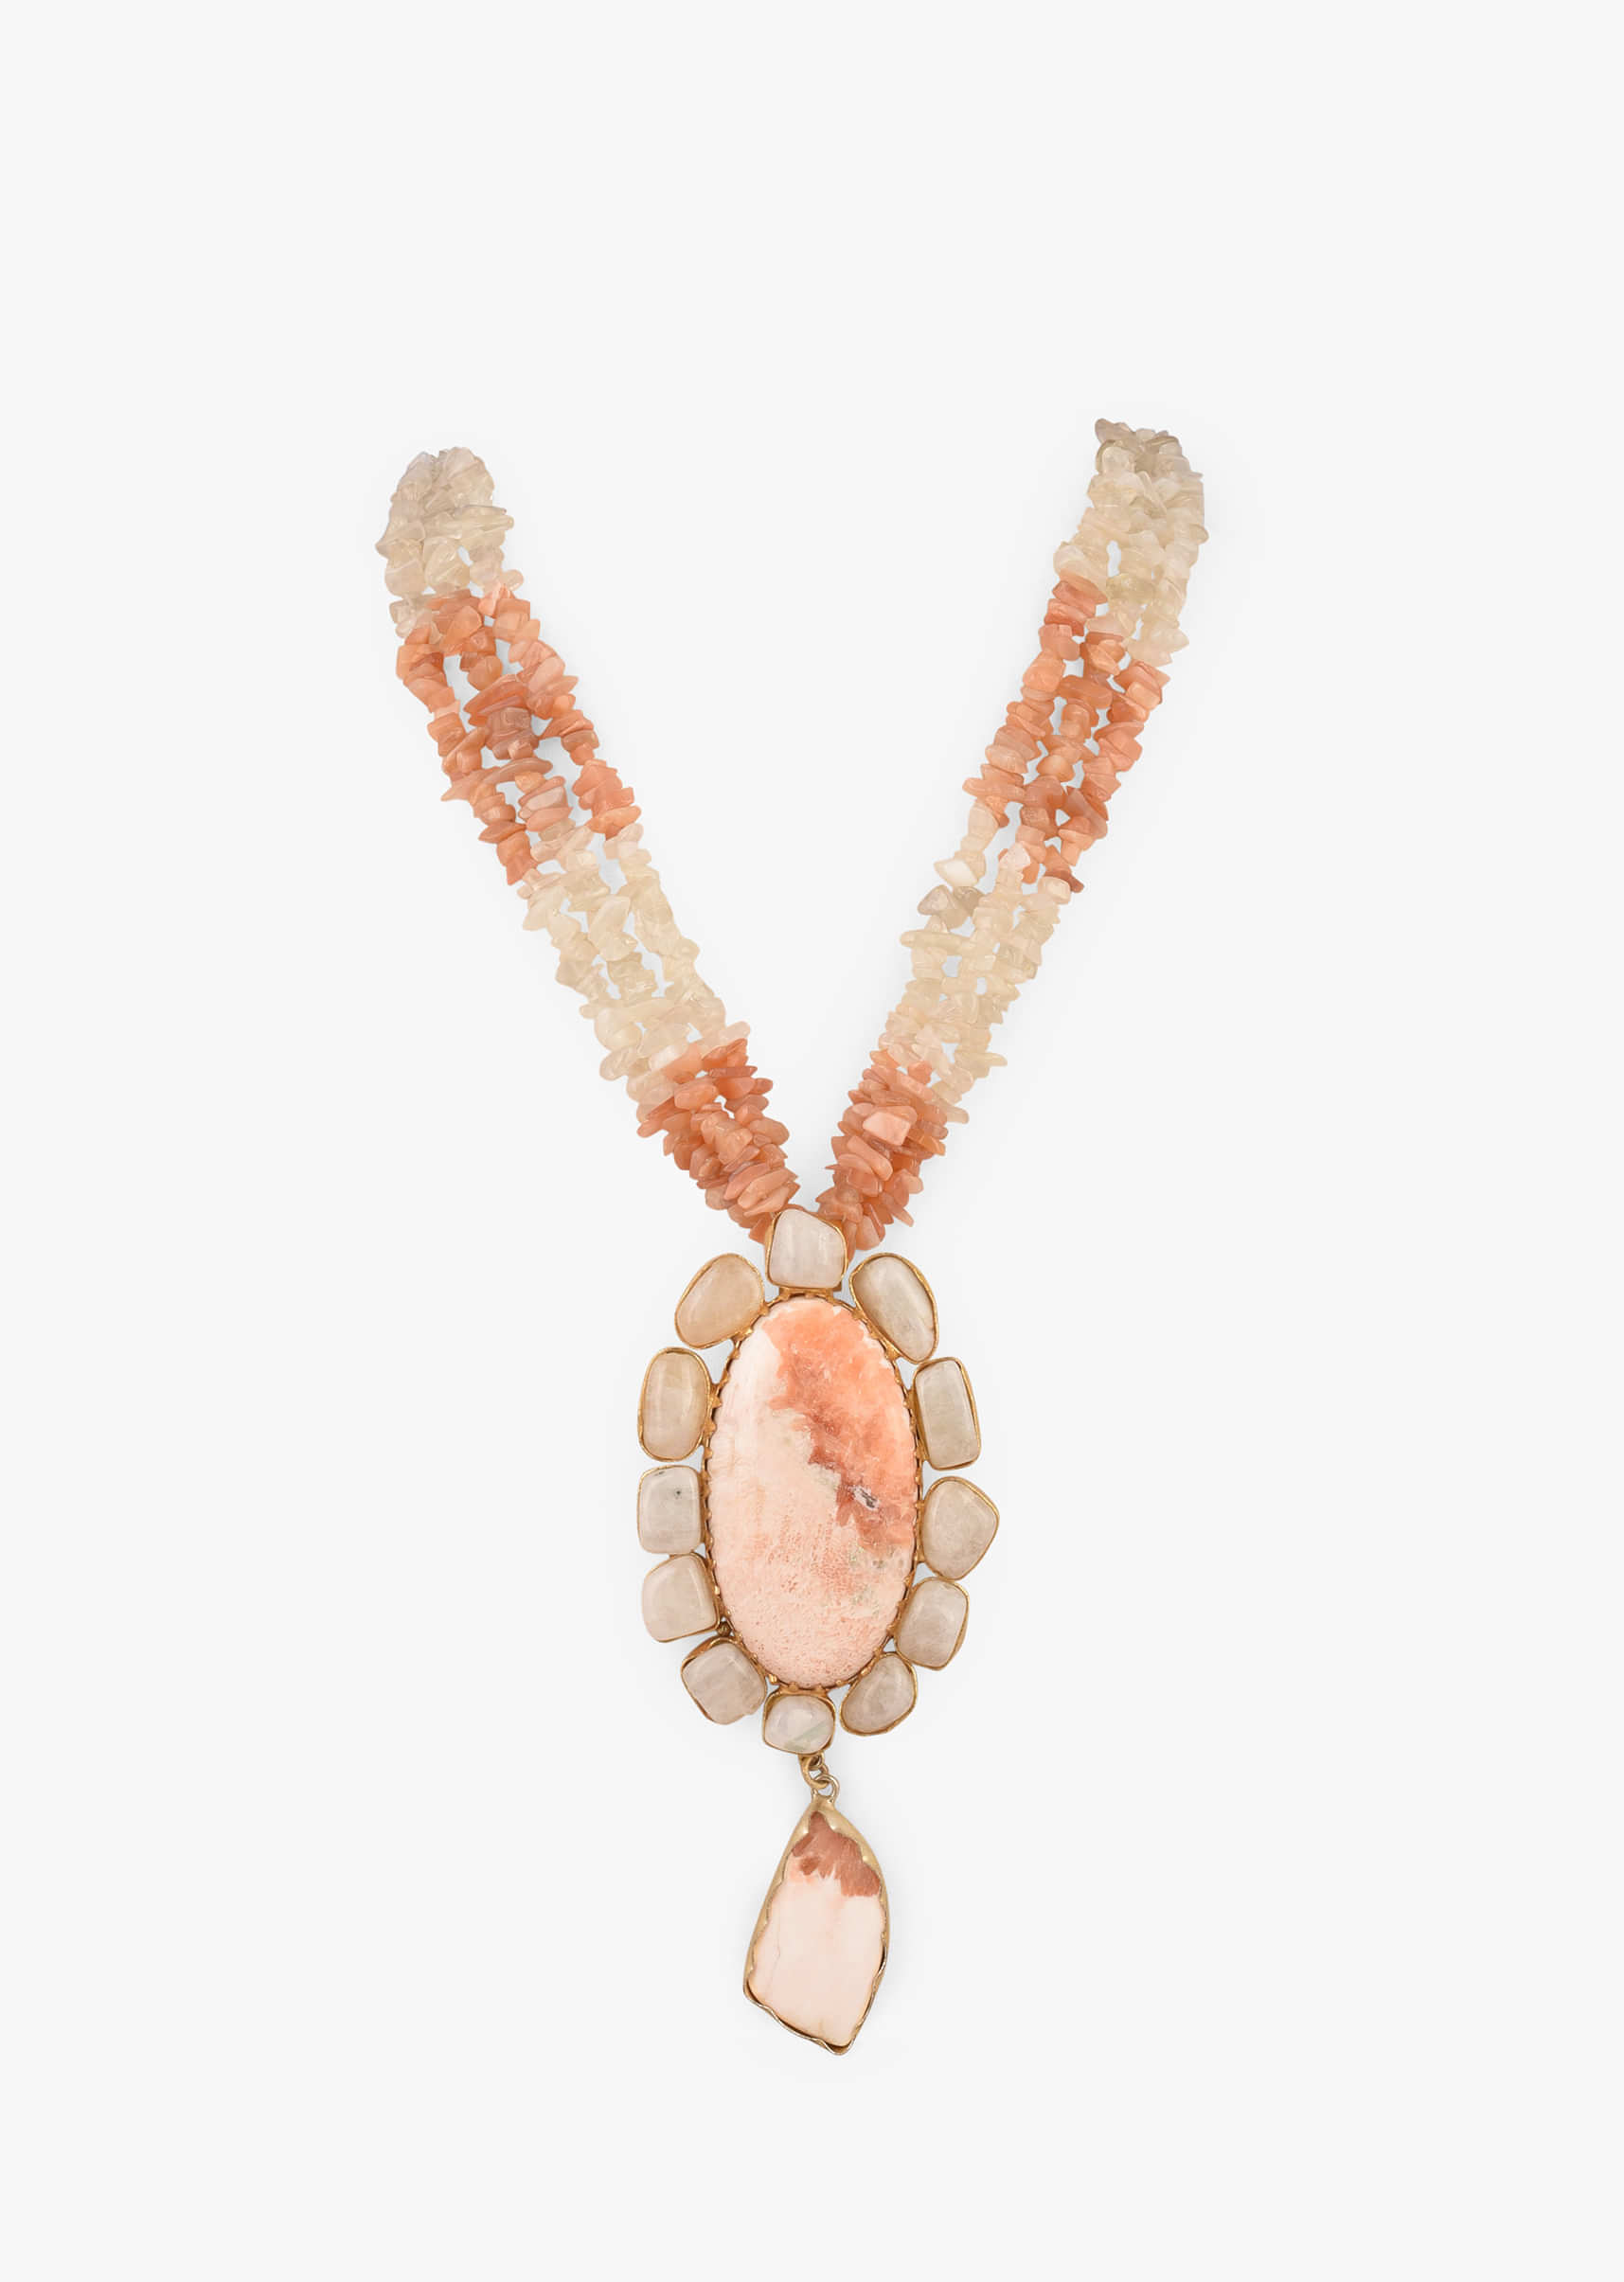 Peach And White Oval Semi Precious Stone Necklace With Tiny Stone Strings 